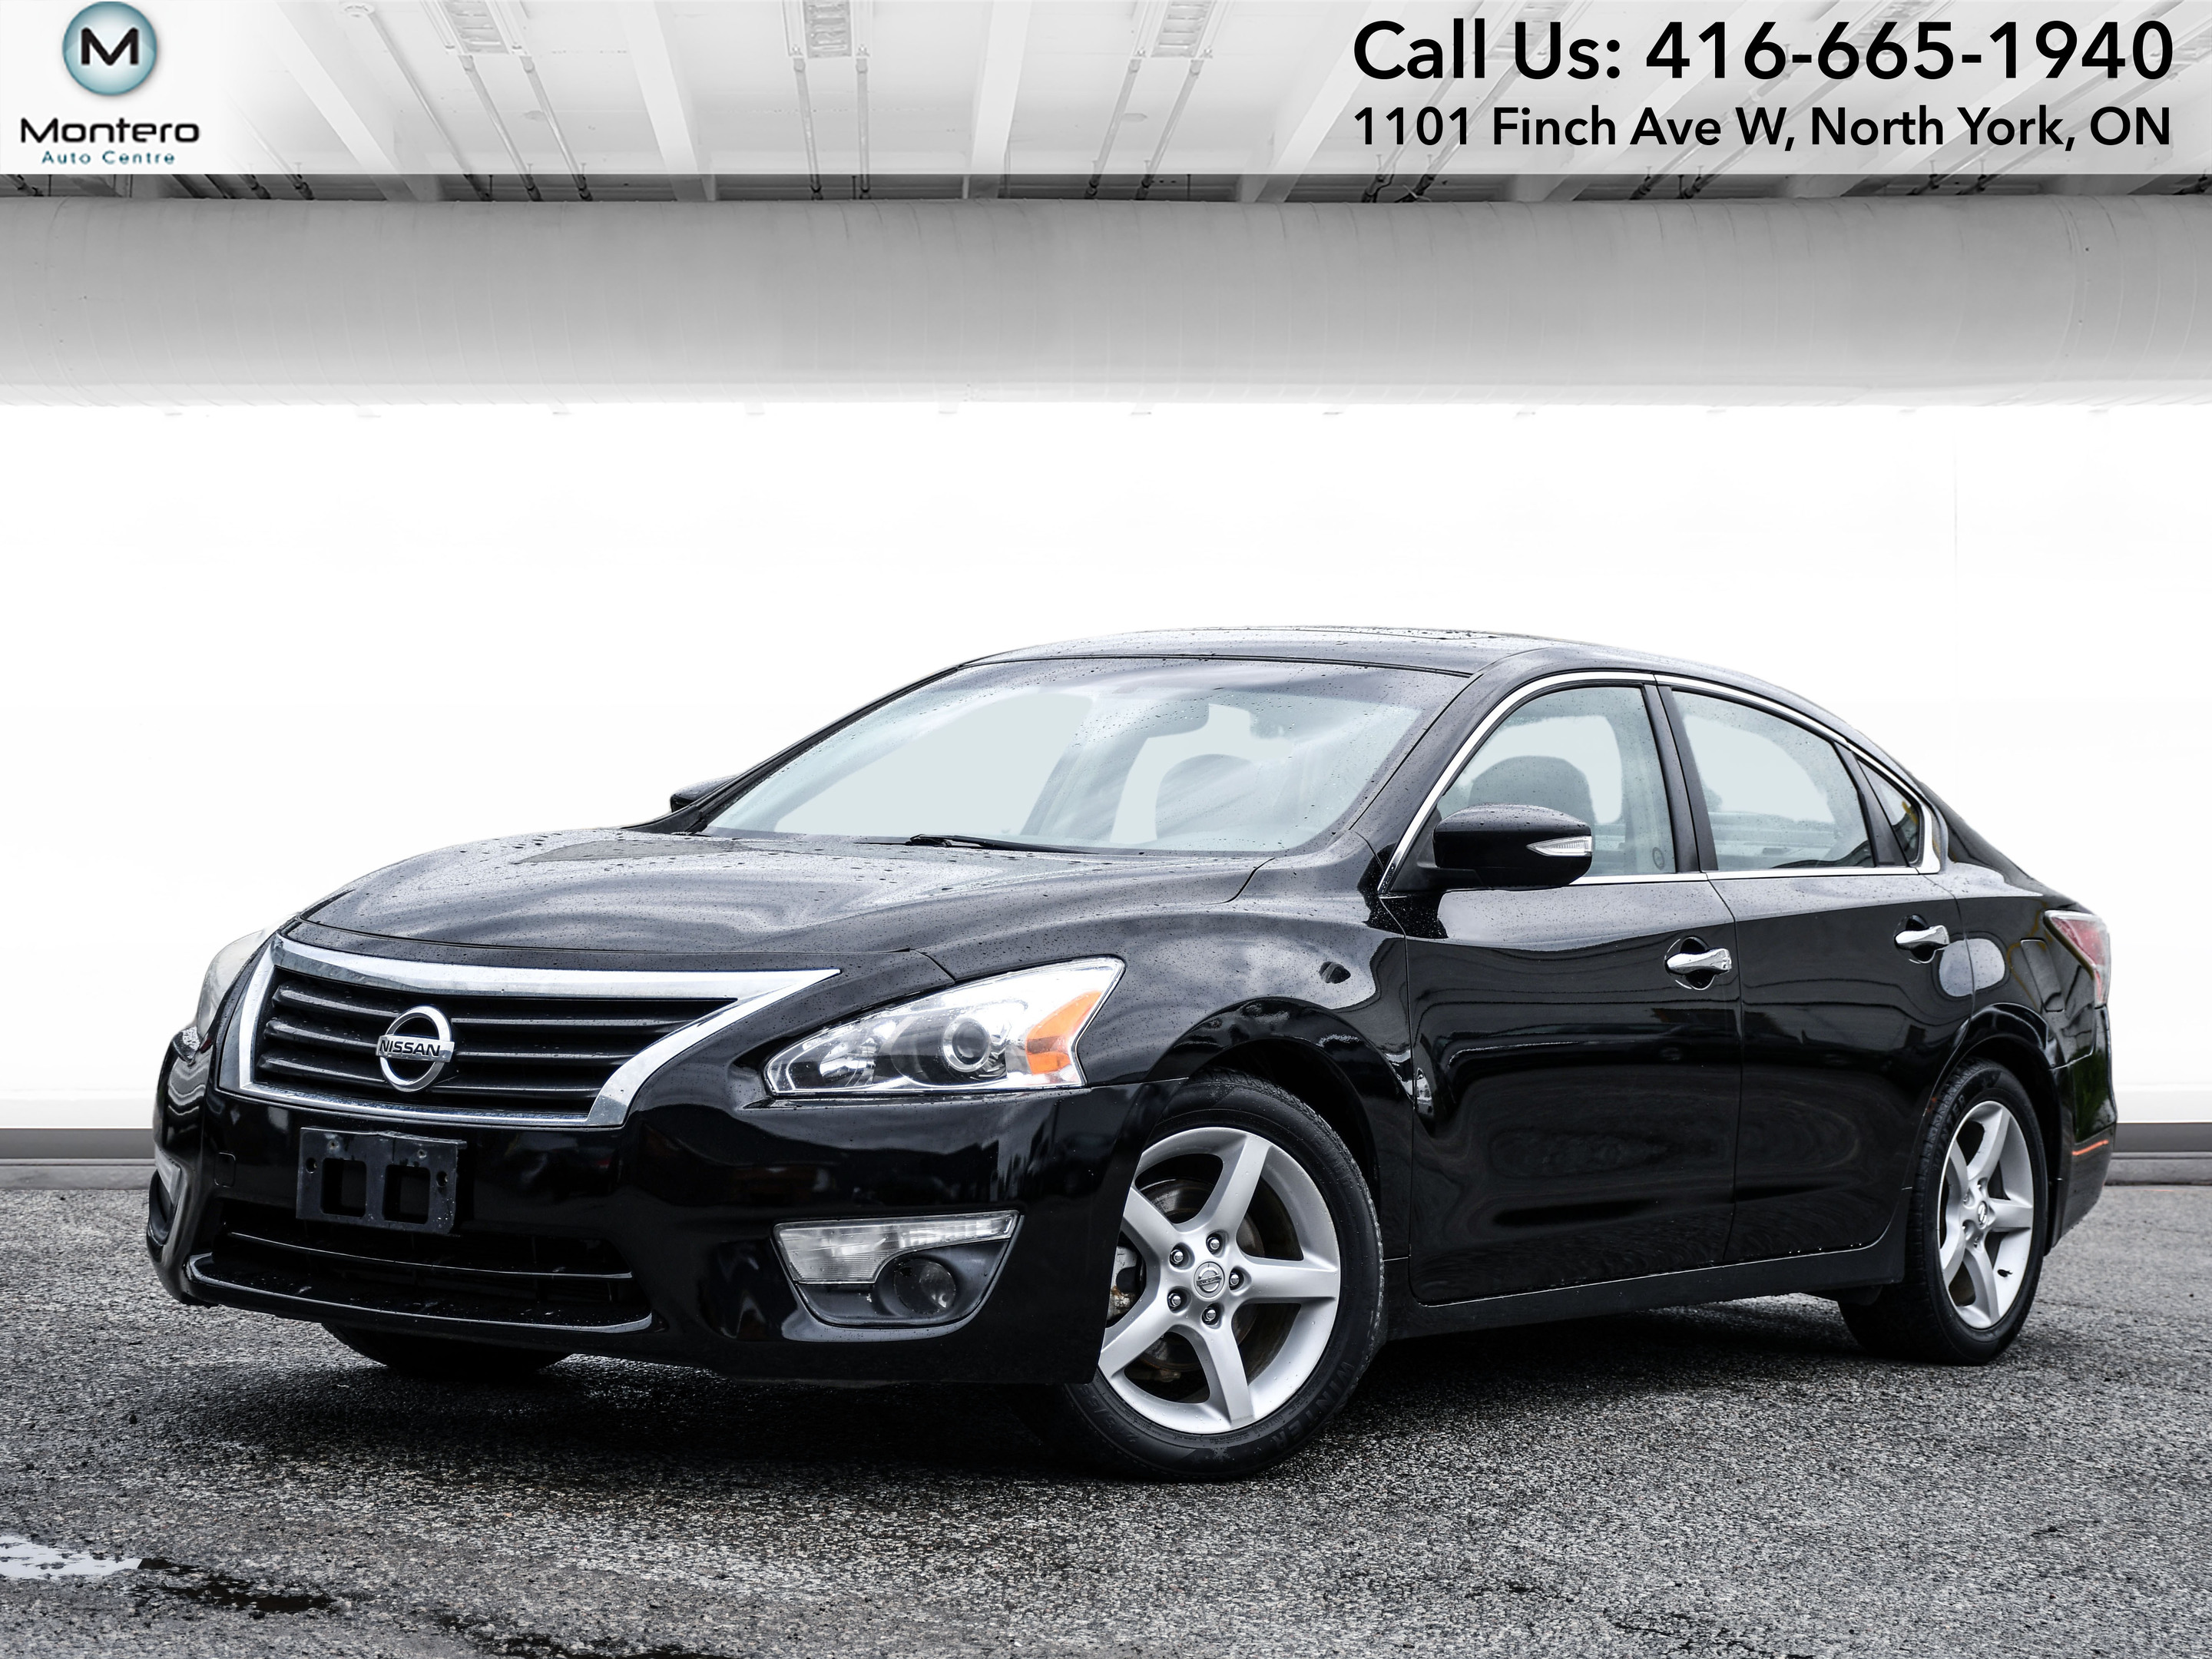 2013 Nissan Altima 4dr Sdn I4 CVT 2.5 SL AS-IS SPECIAL